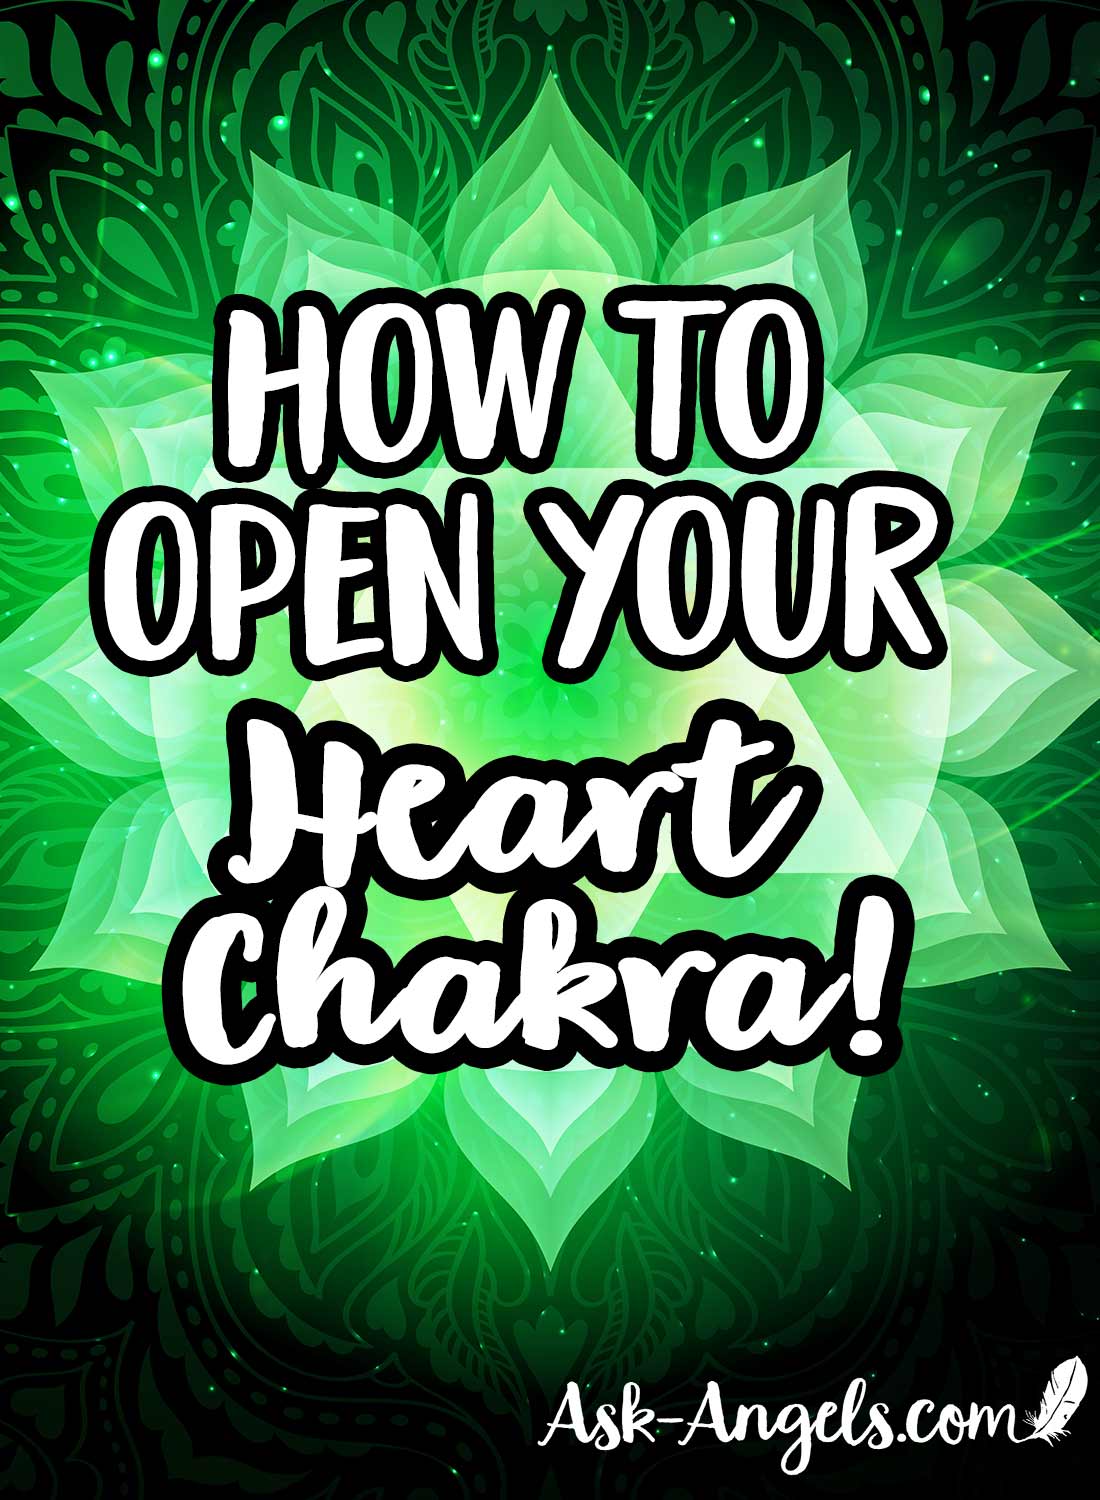 Heart Chakra Opening - How to Open Your Heart